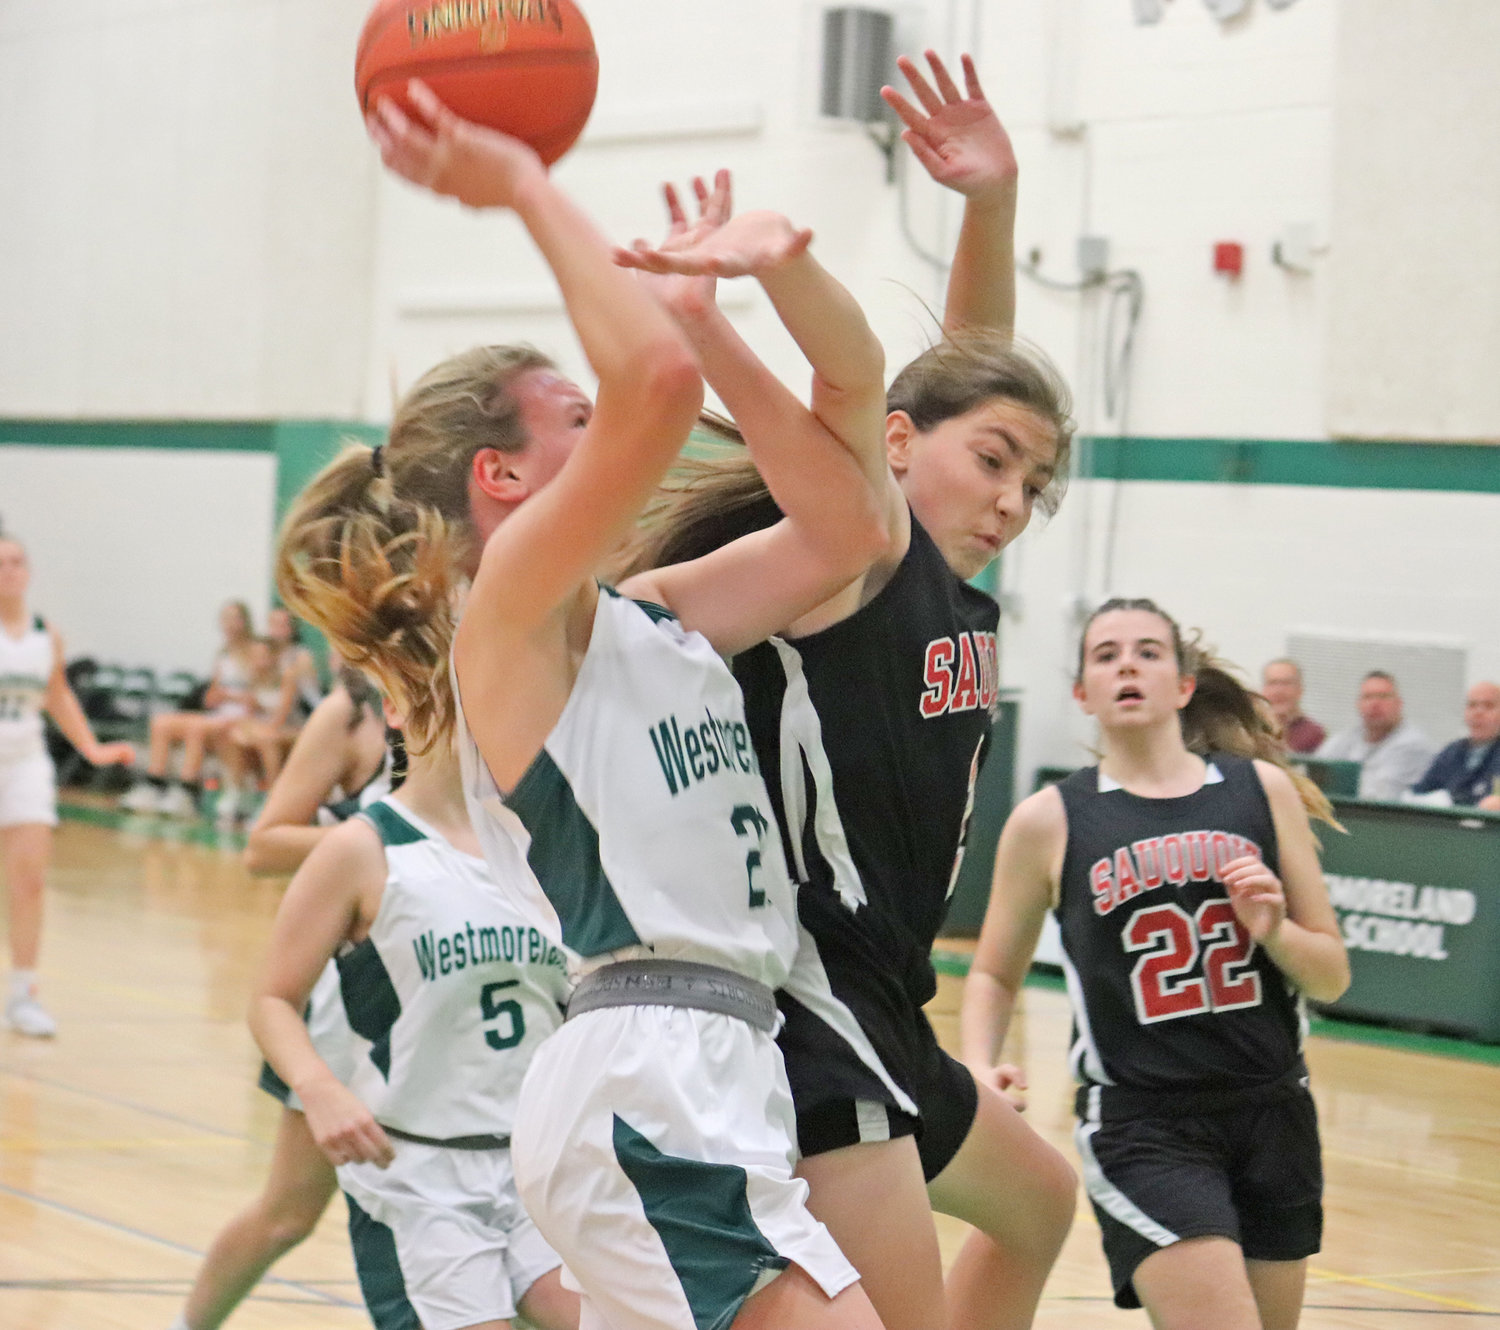 Emily Gubbins of Westmorelland shots as Alaina Weaver of Sauquoit Valley tries to get a hand on the ball Friday in Westmoreland. The Bulldogs won 55-29 on home court. Gubbins contributed three points.